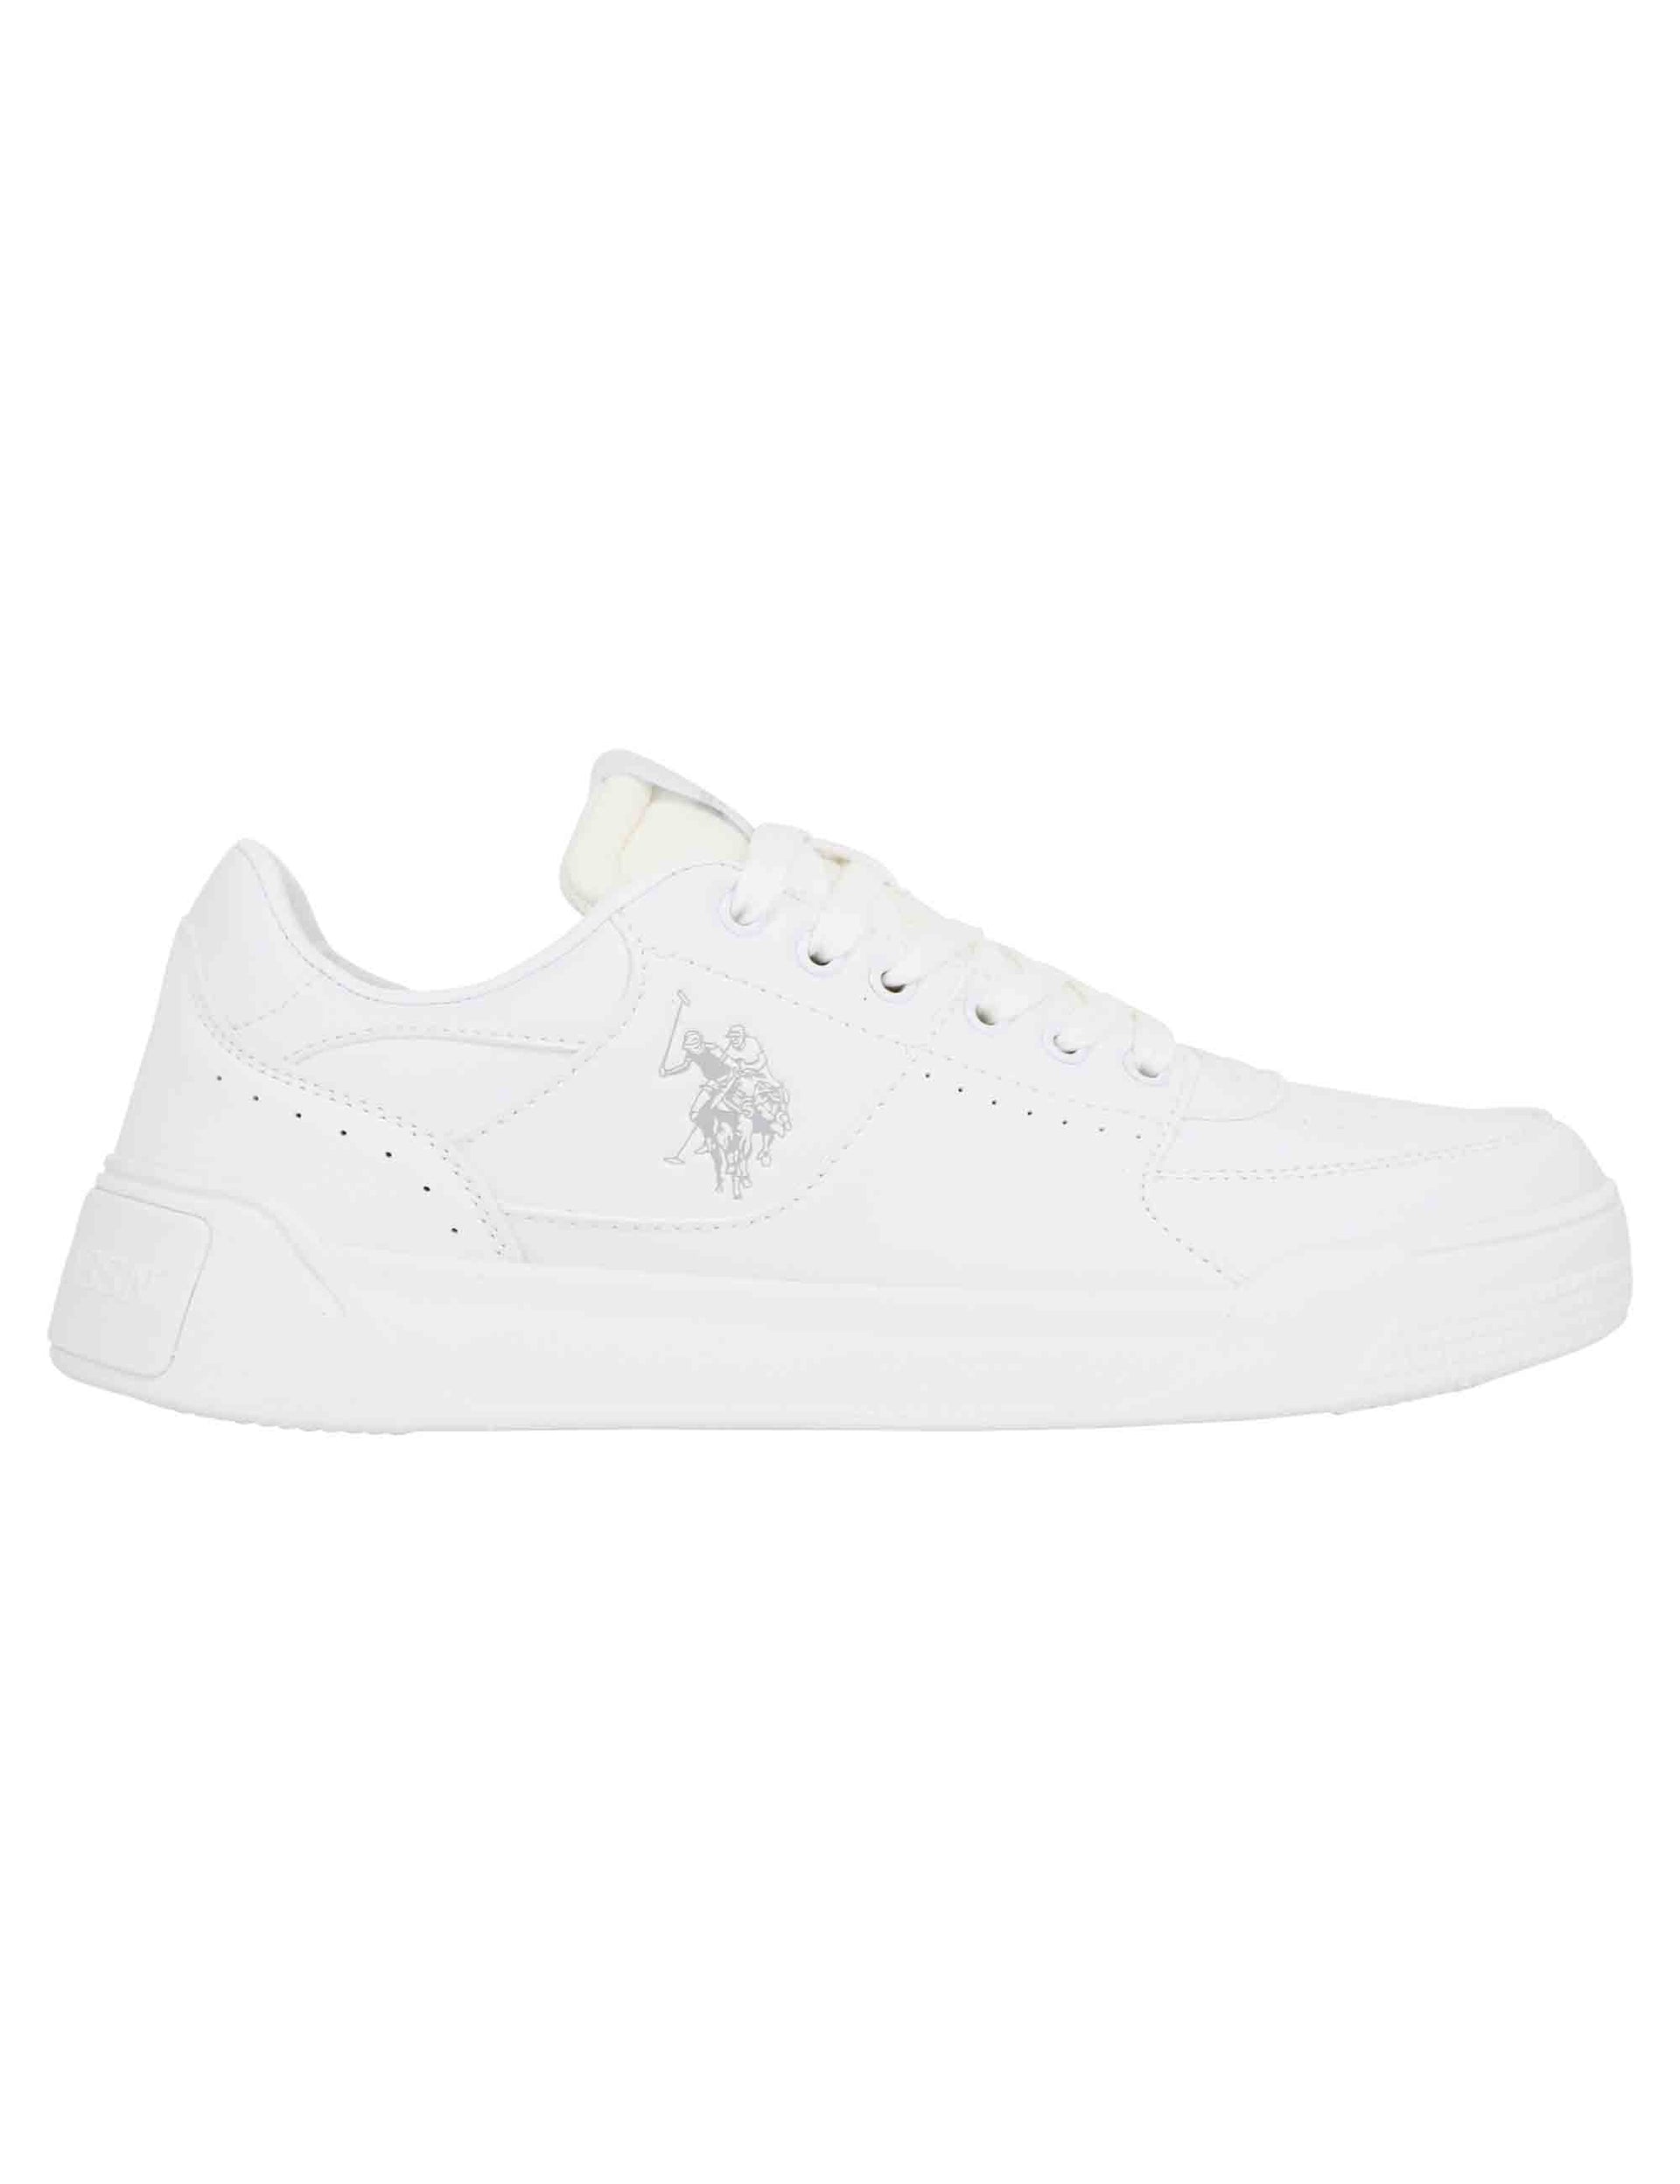 Sneakers uomo in ecopelle bianca con logo laterale